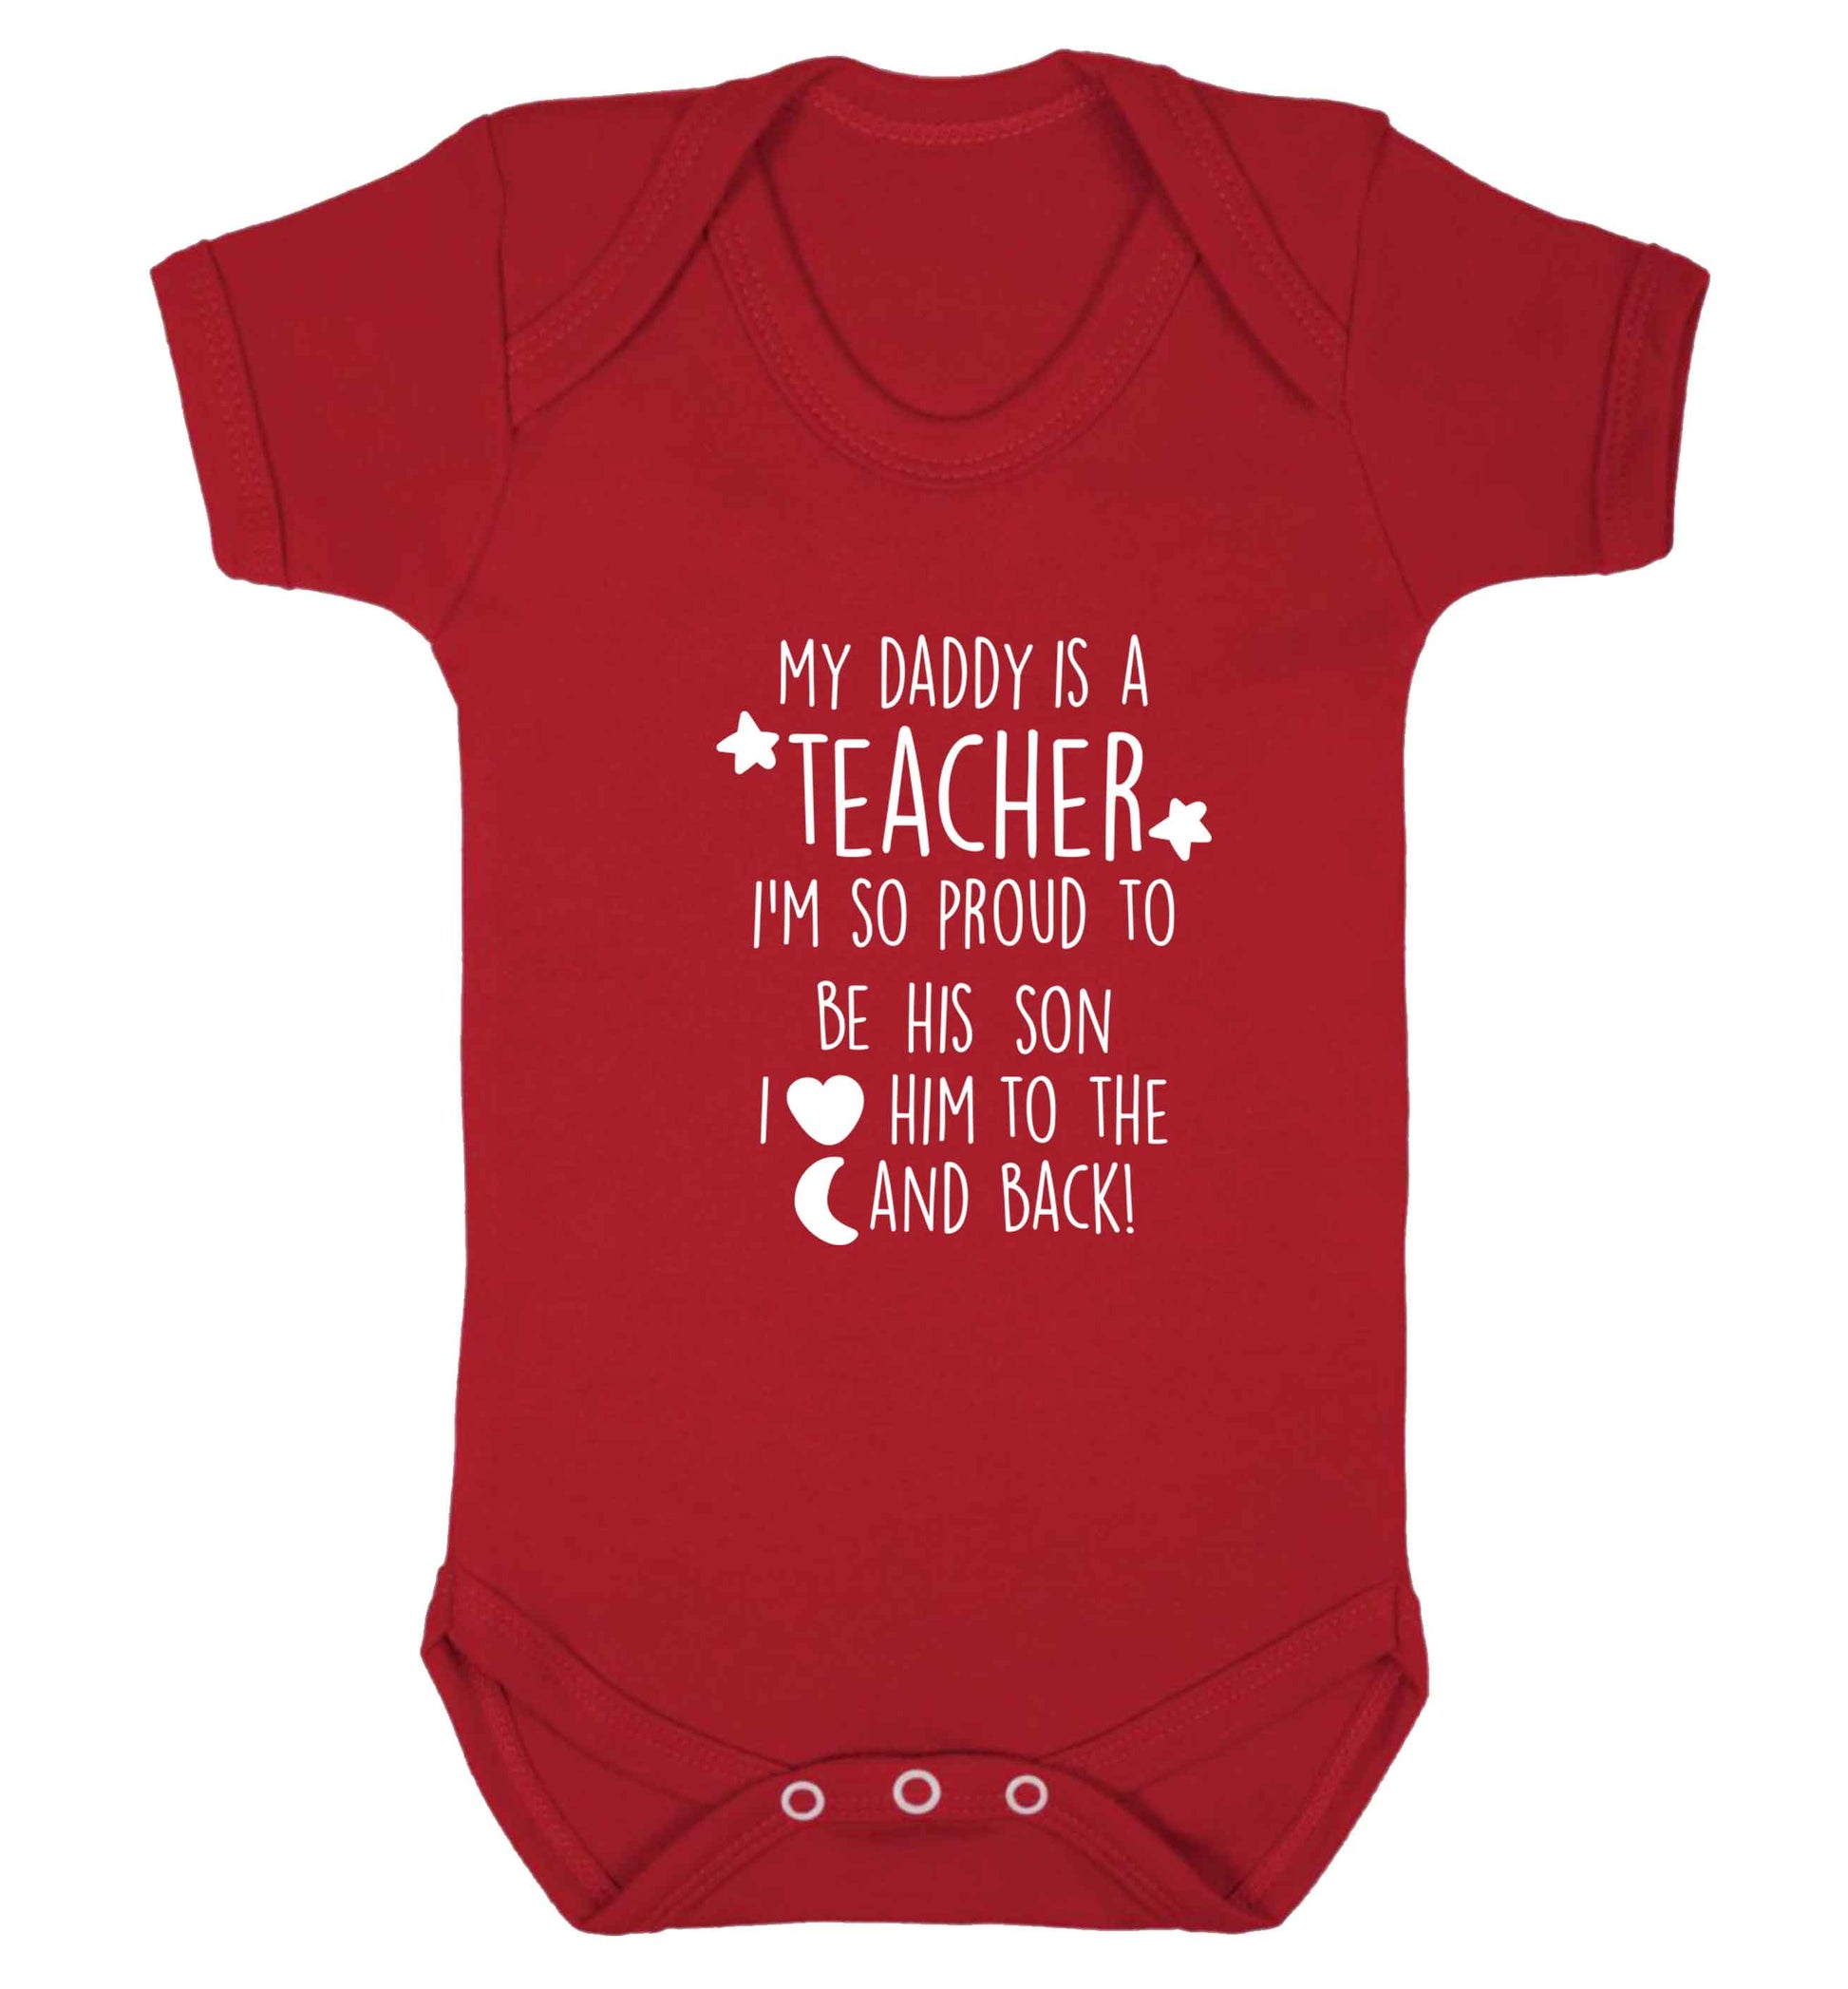 My daddy is a teacher I'm so proud to be his son I love her to the moon and back baby vest red 18-24 months